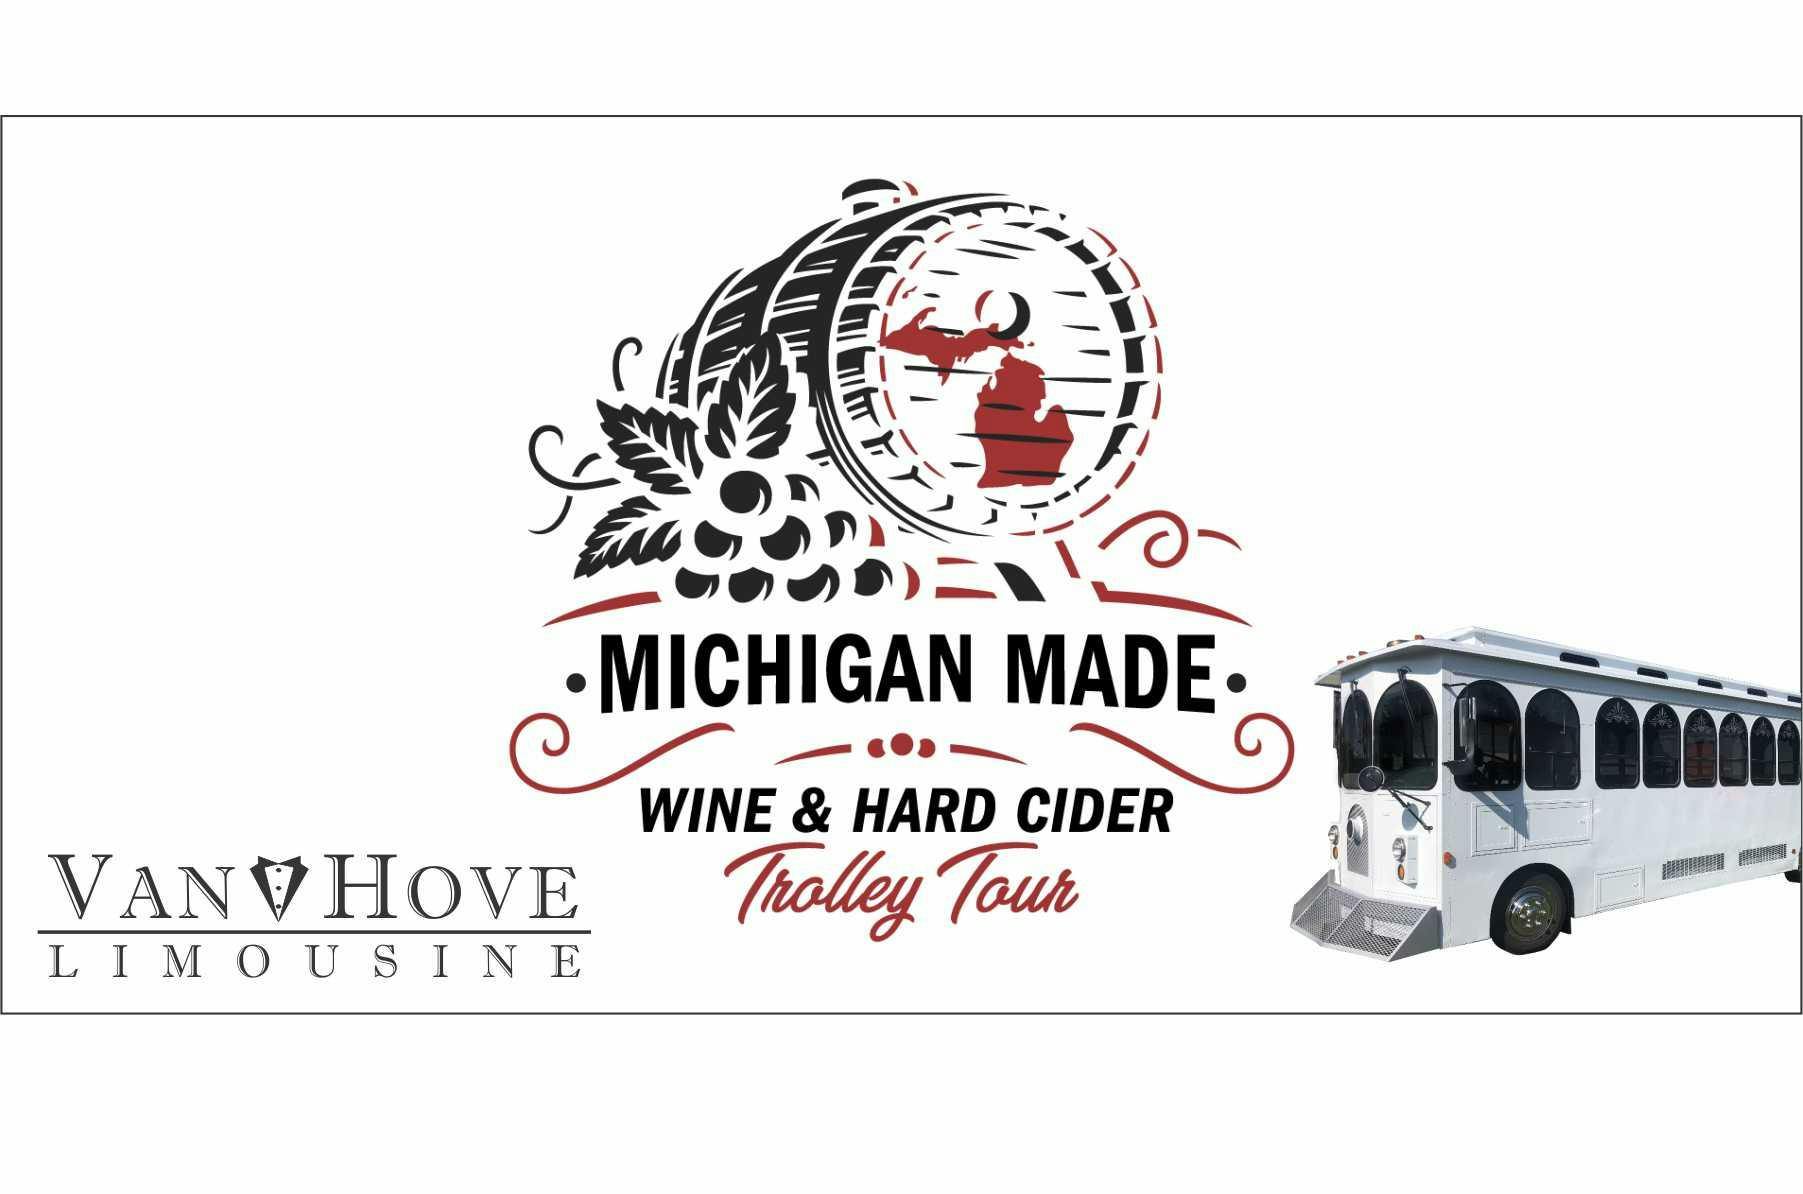 Michigan Made Wine & Hard Cider Trolley / Bus Tour From Mt. Clemens